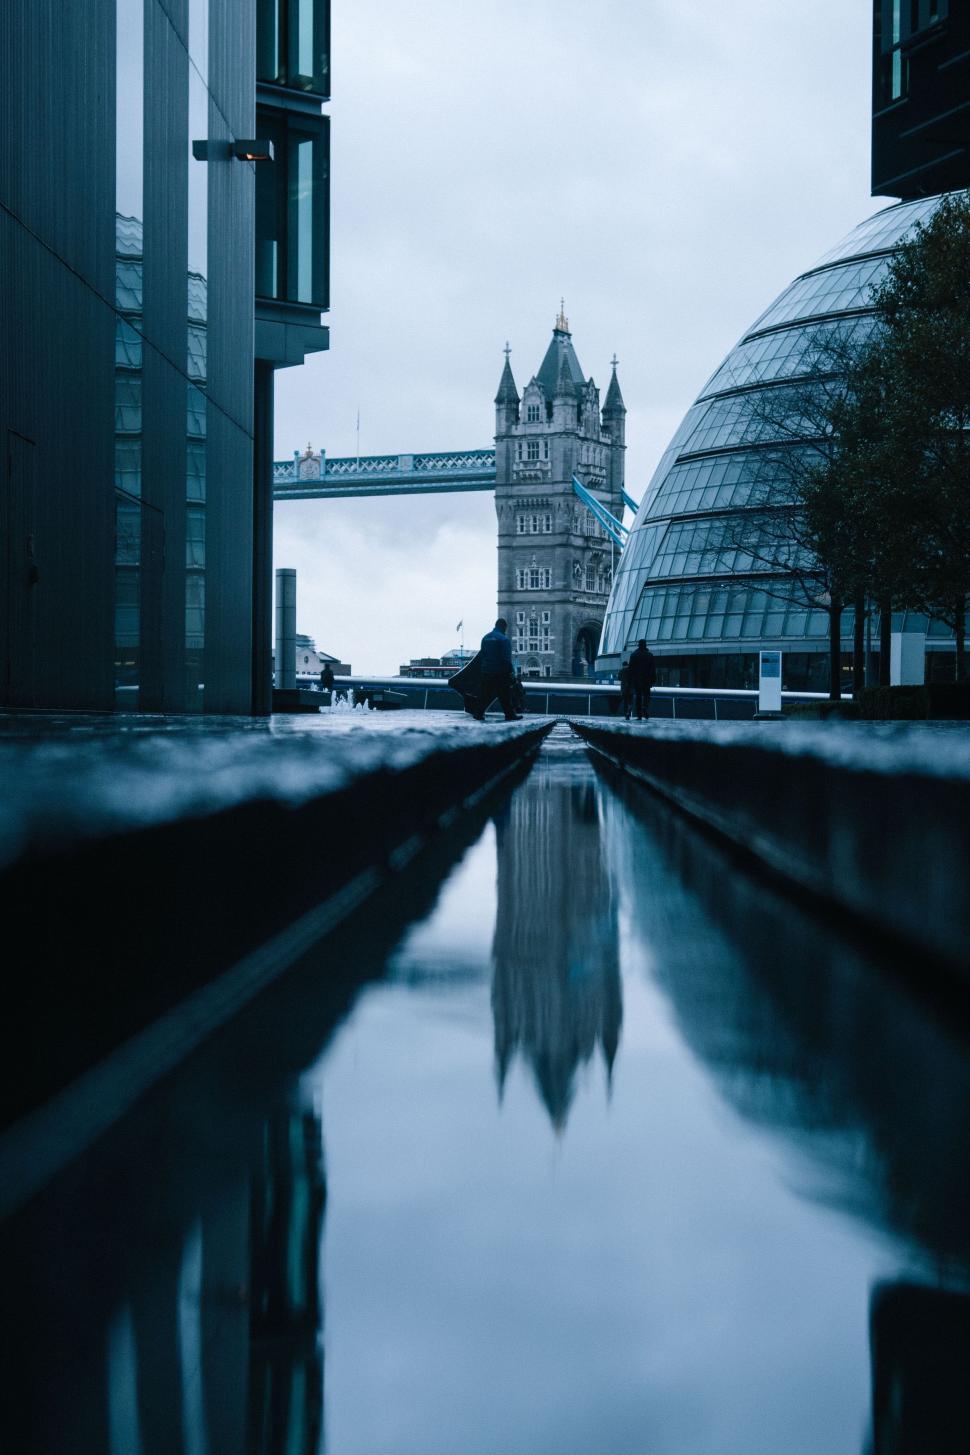 Free Image of Tower Bridge Reflects in Water 